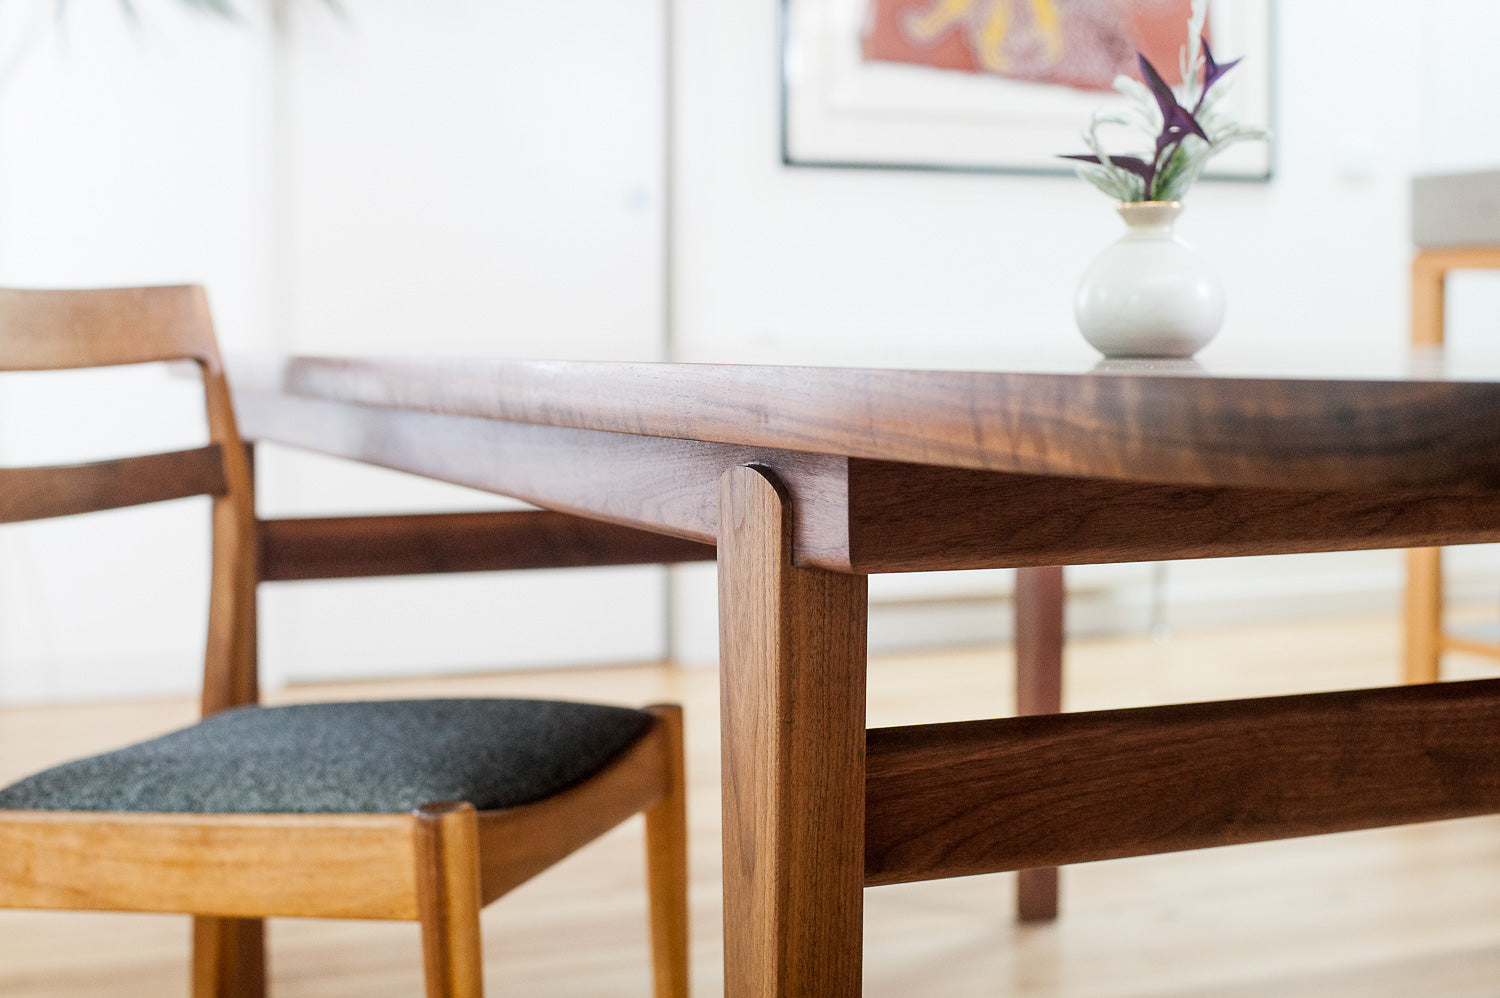 Wesley Dining Table in Walnut - detailed view of leg joinery with dining chair. Designed and made by Hey, Porter.